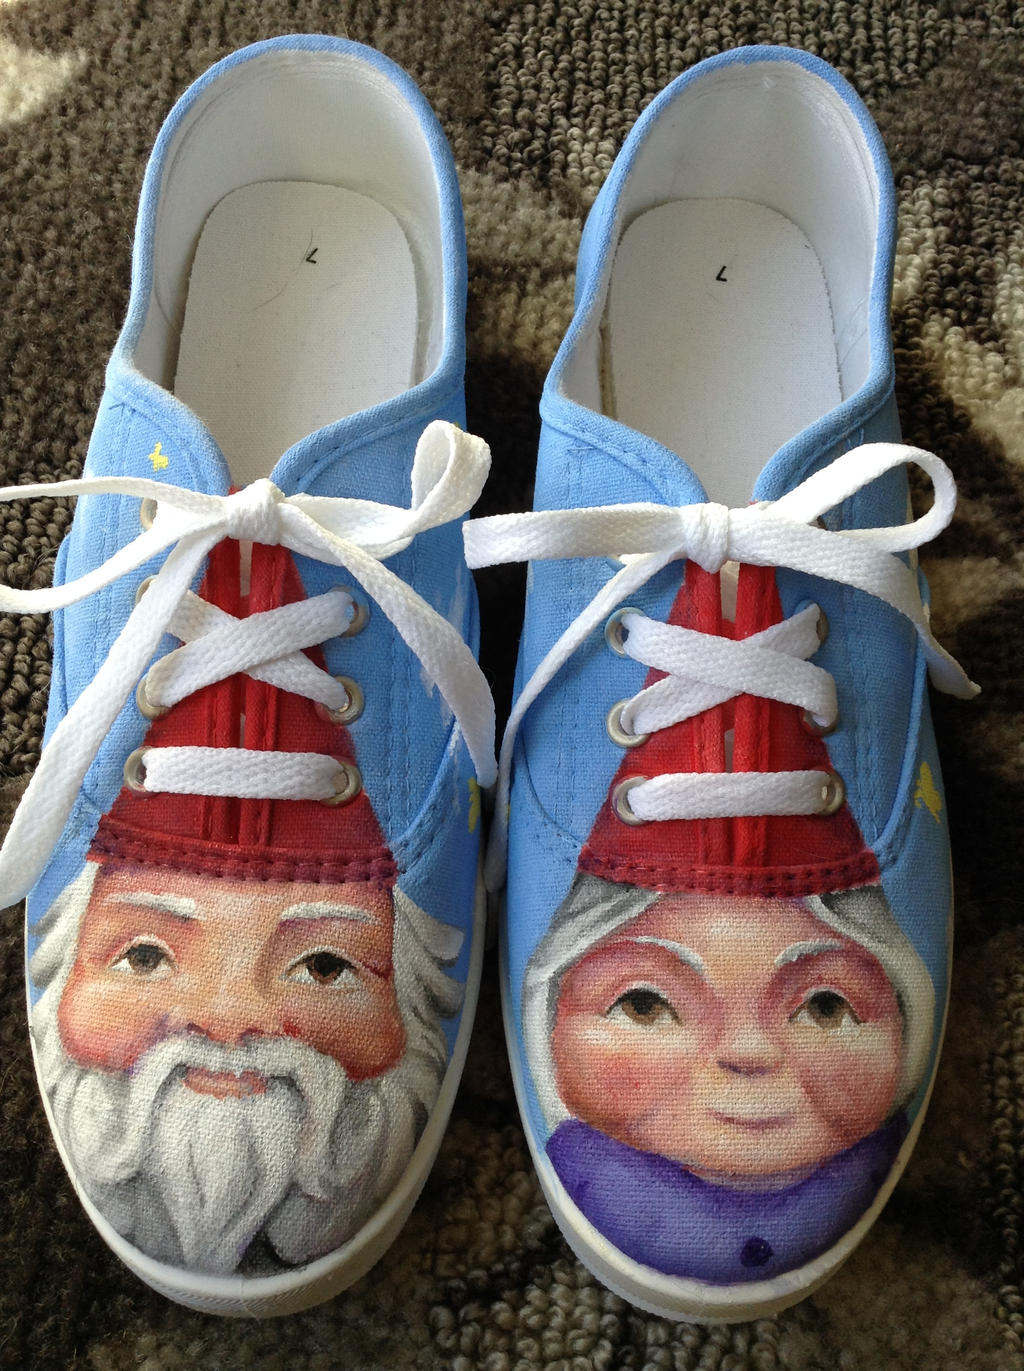 Gnome shoes by SkyAboveUs on DeviantArt